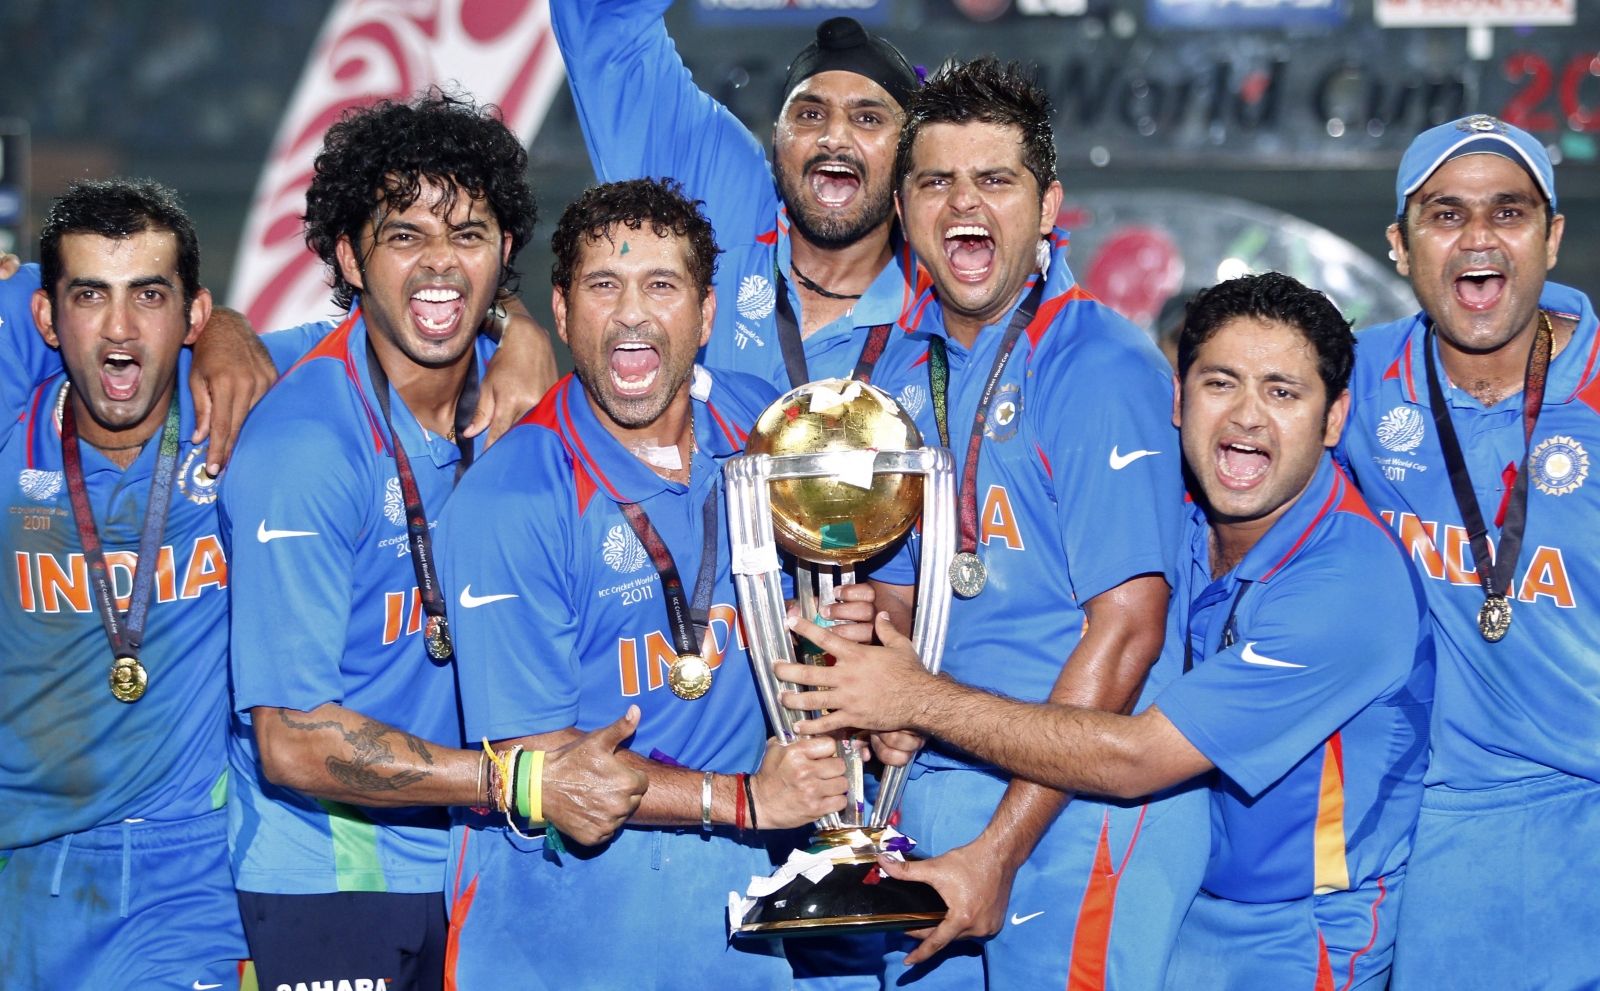 Cricket World Cup 2015 predictions: Which nation will triumph?